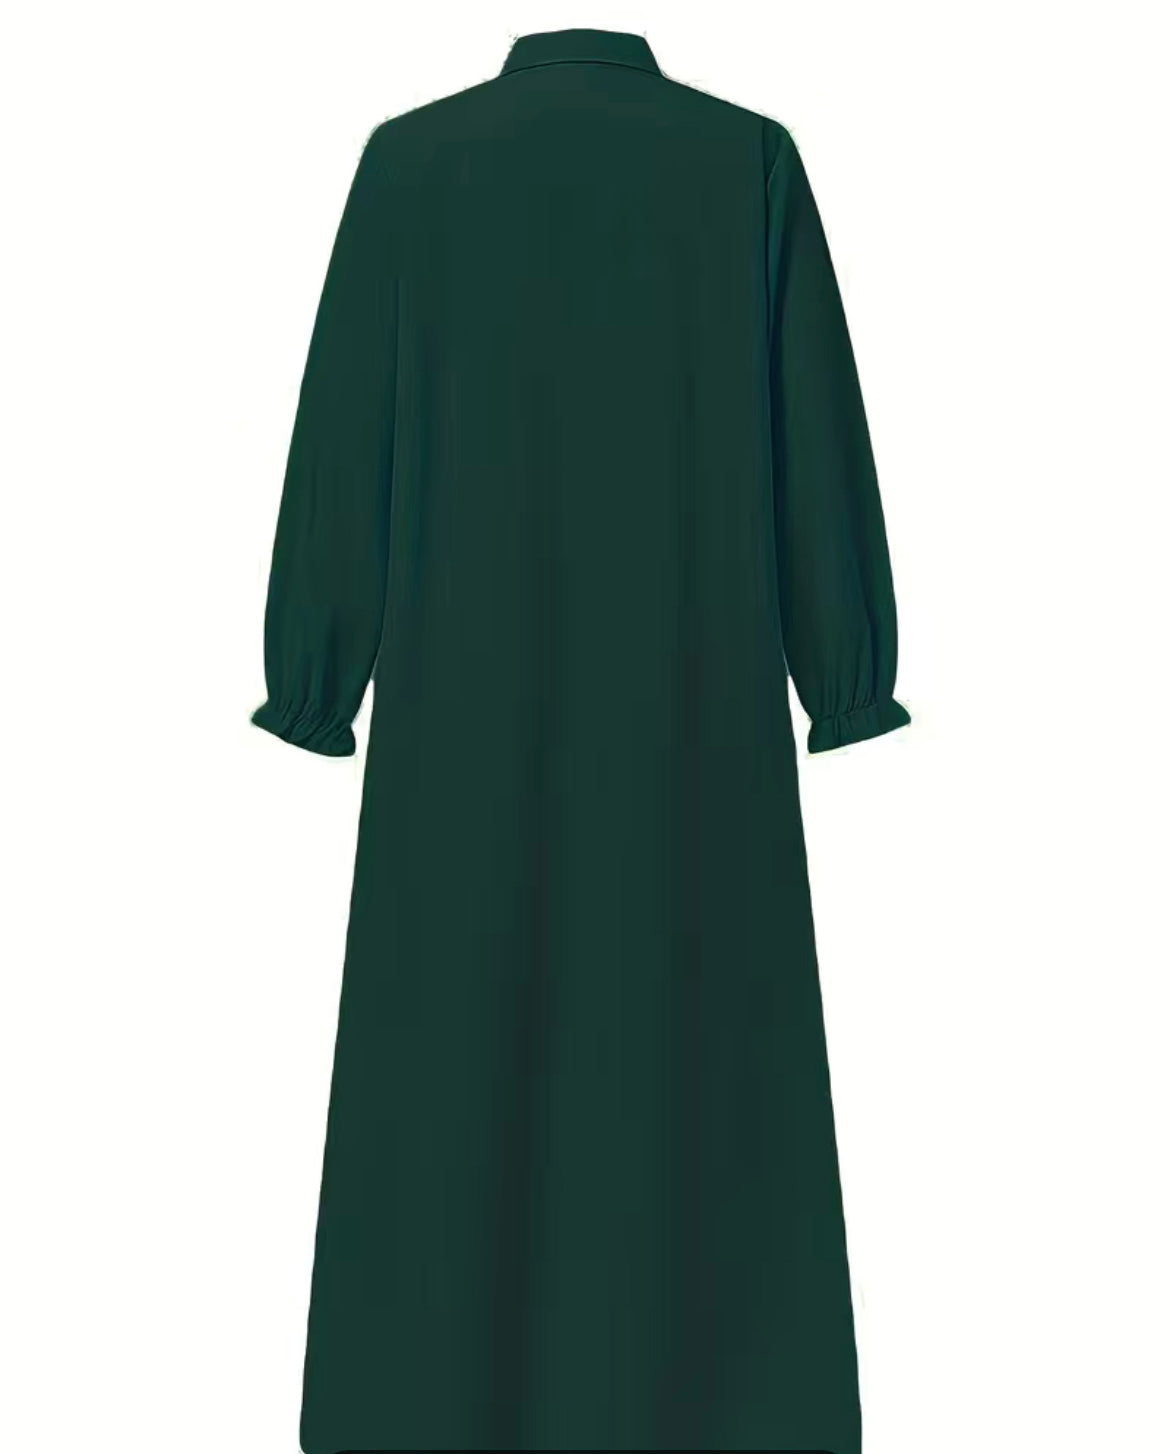 Front Button with Puff Sleeves Abaya